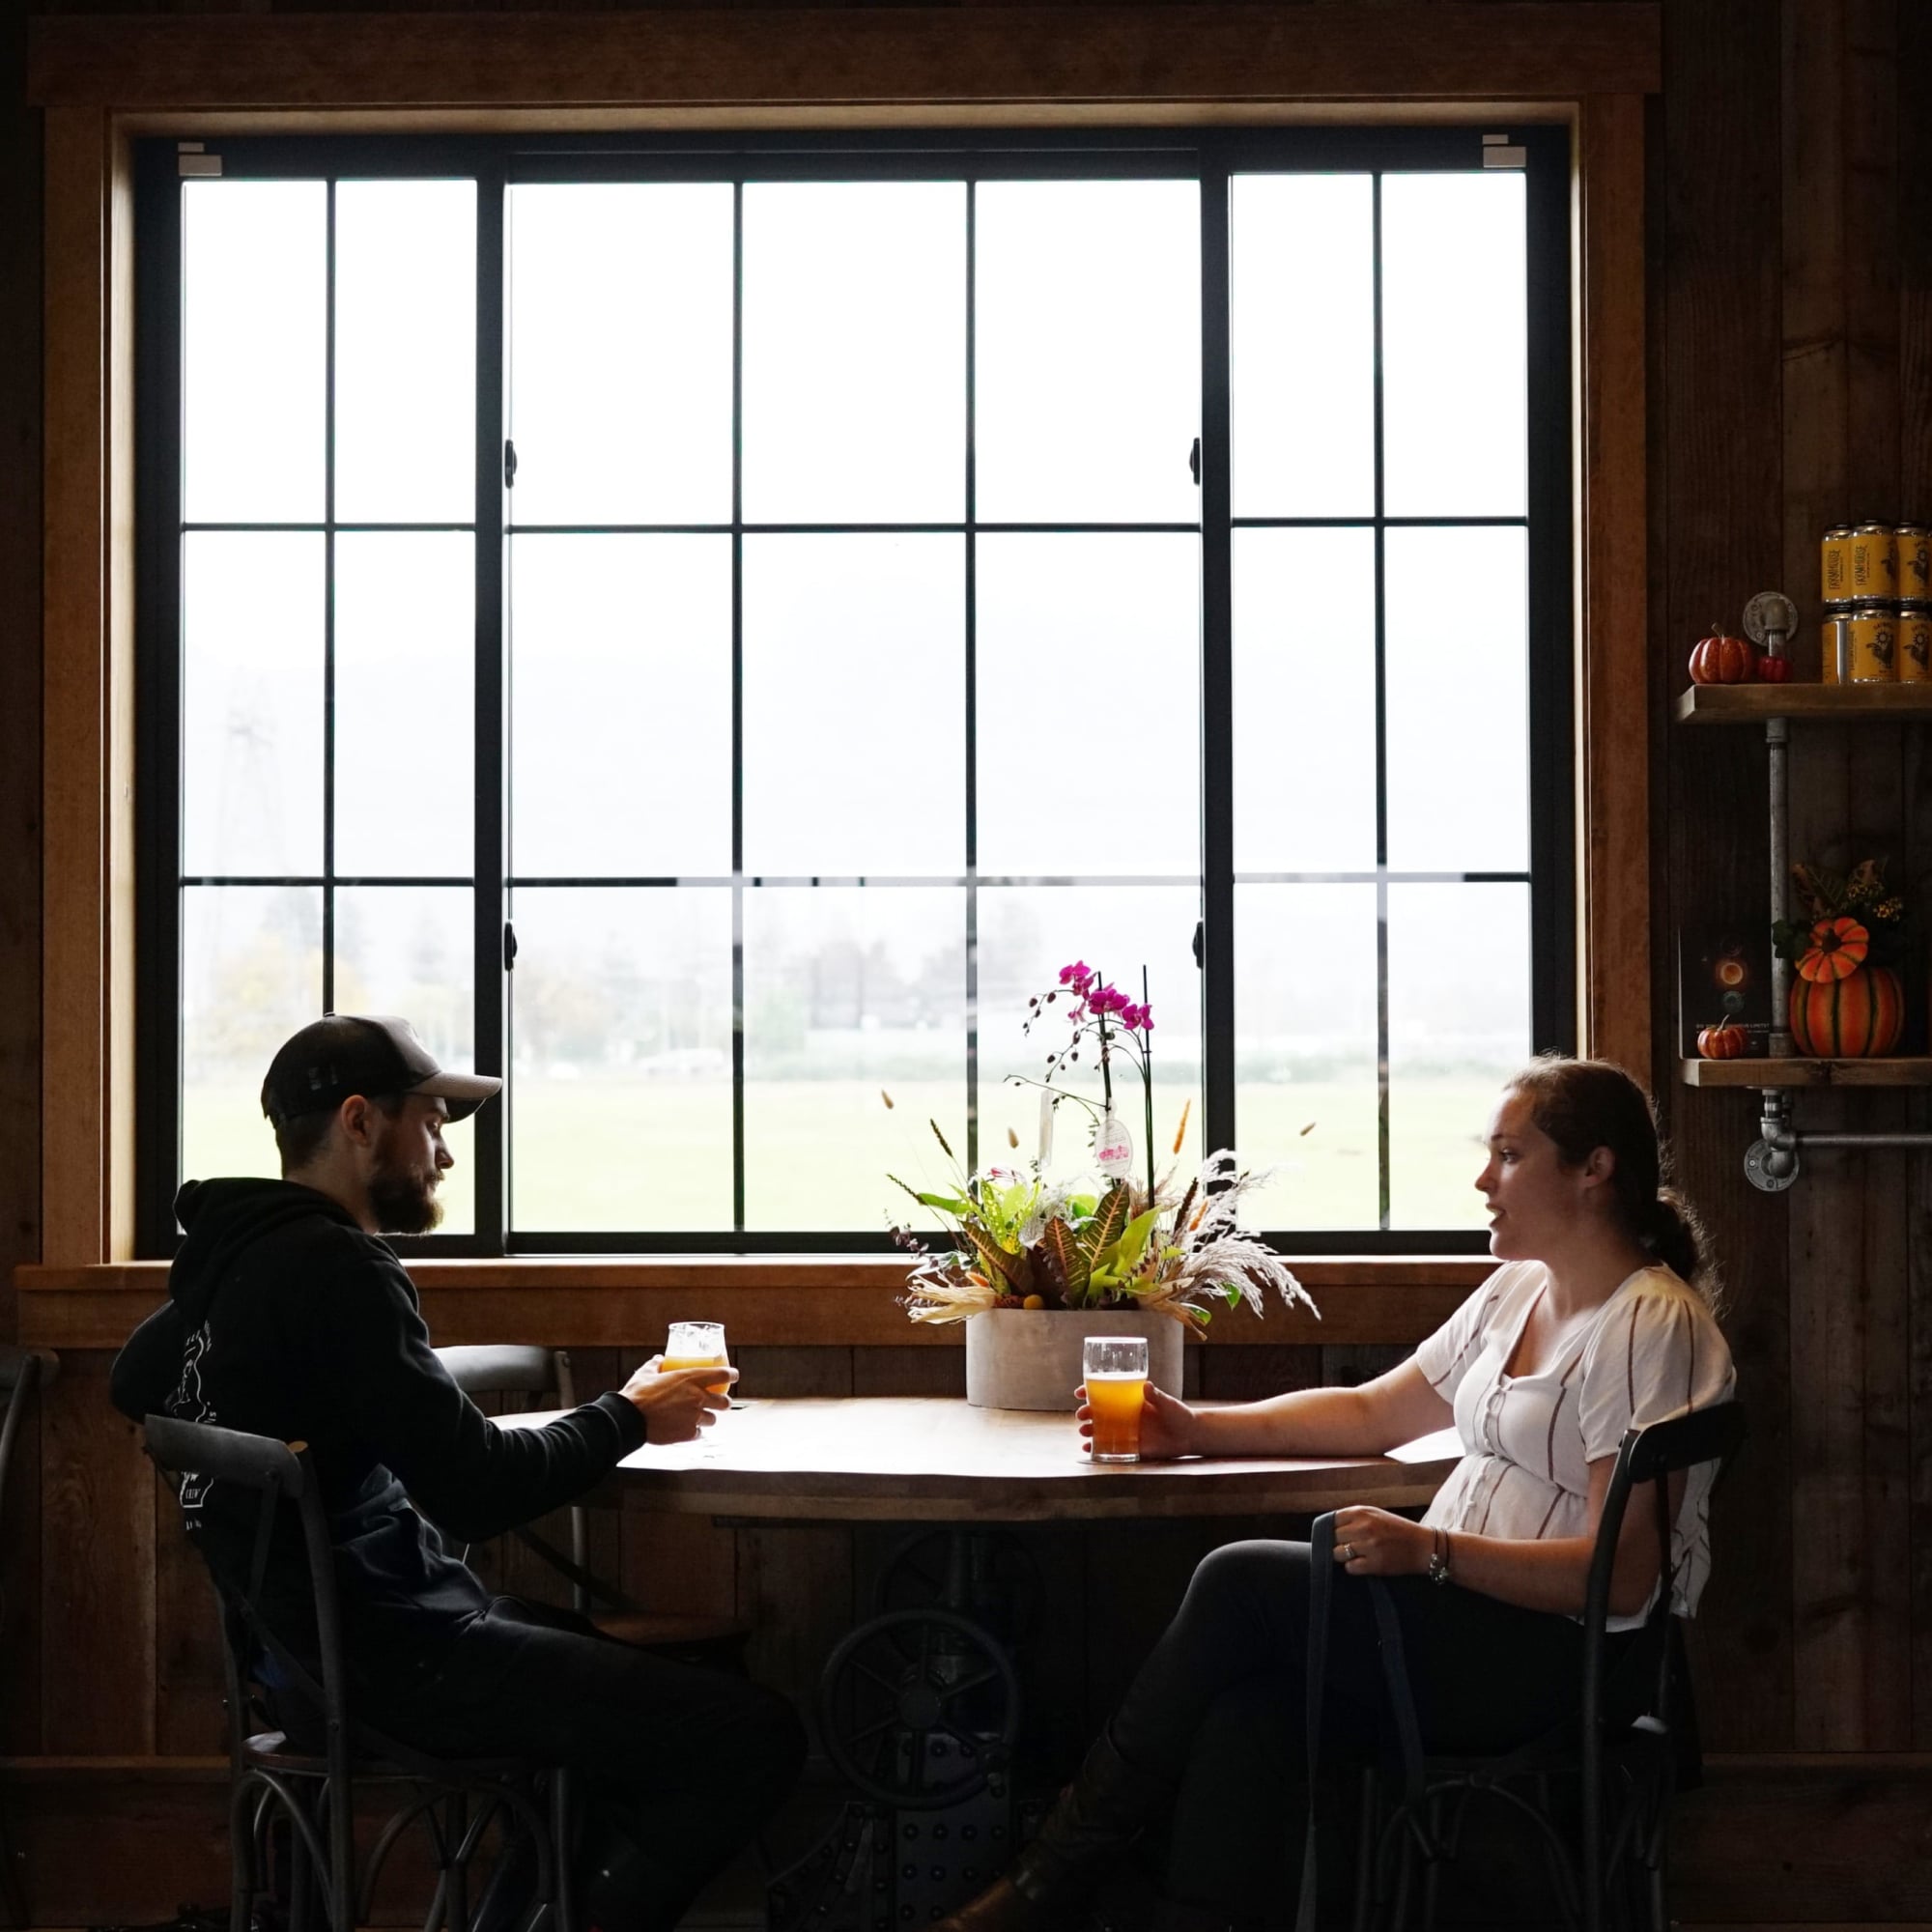 A man and woman sitting near a window at a table.